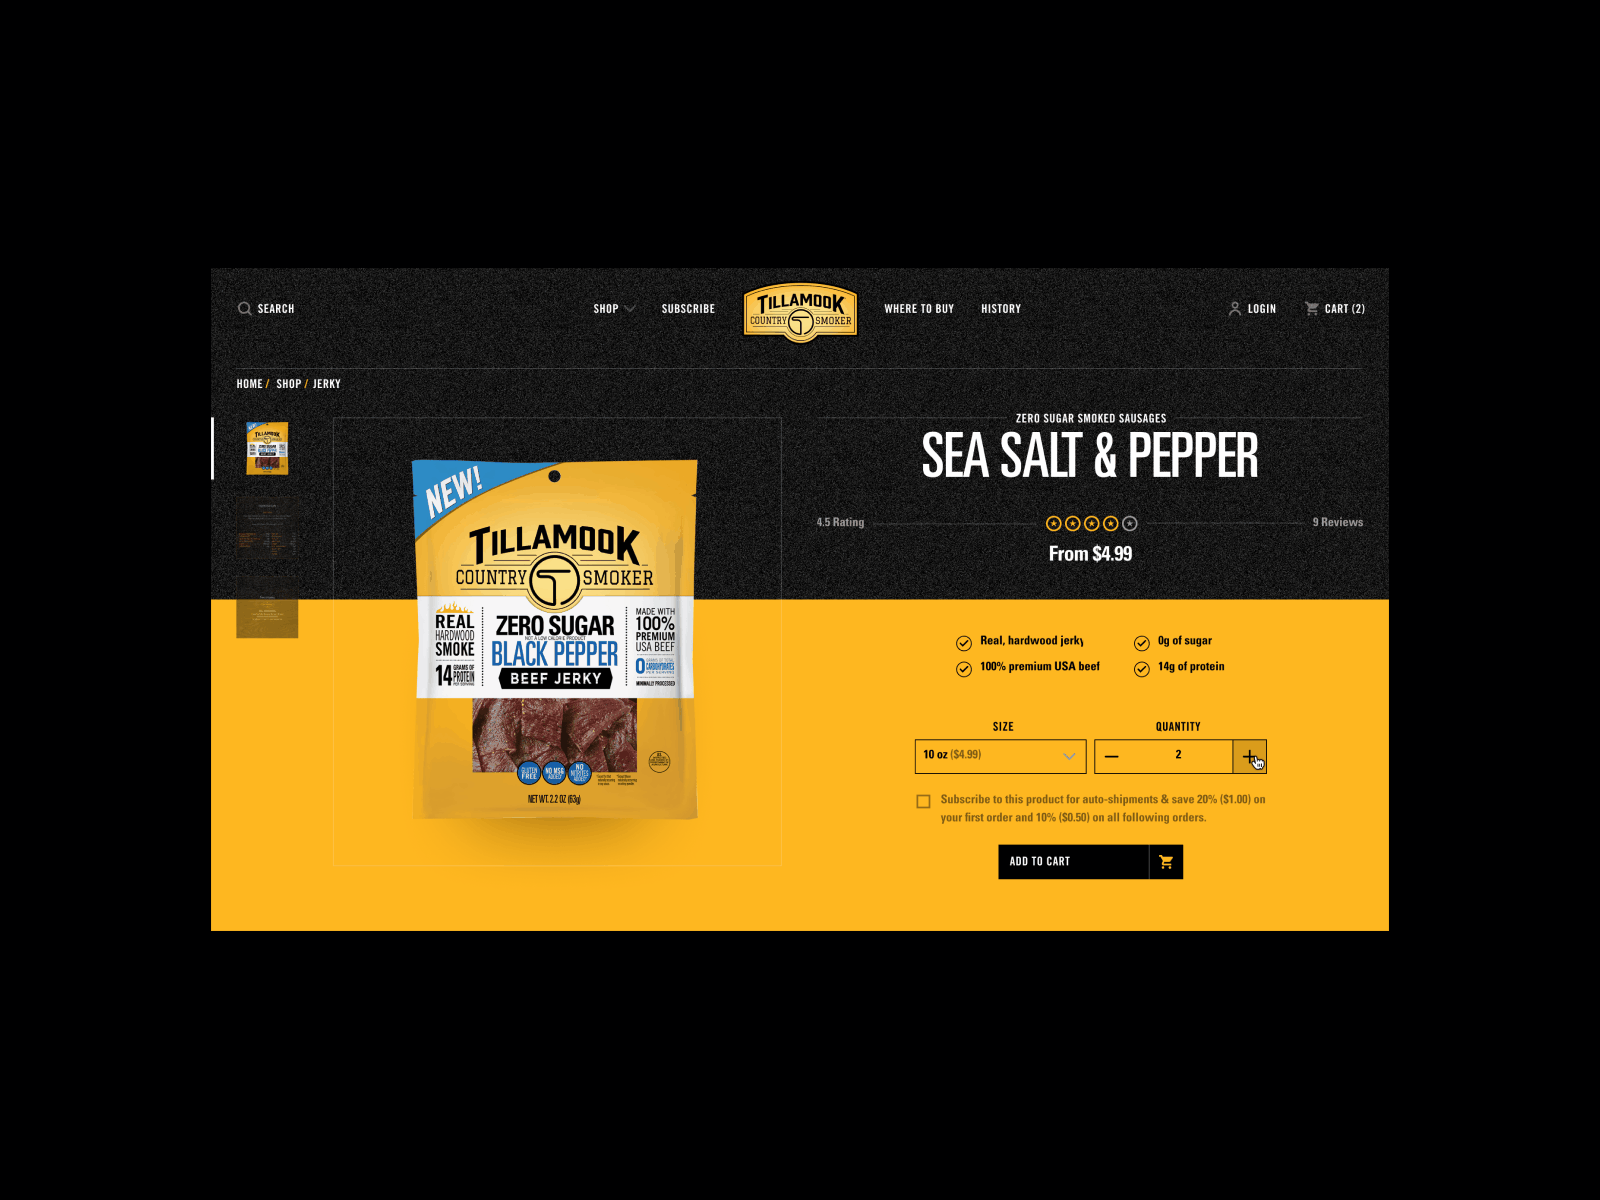 Tillamook Country Smoker - 02 clean design interface landing landing page layout minimal pdp product detail page template typography ui ux web design